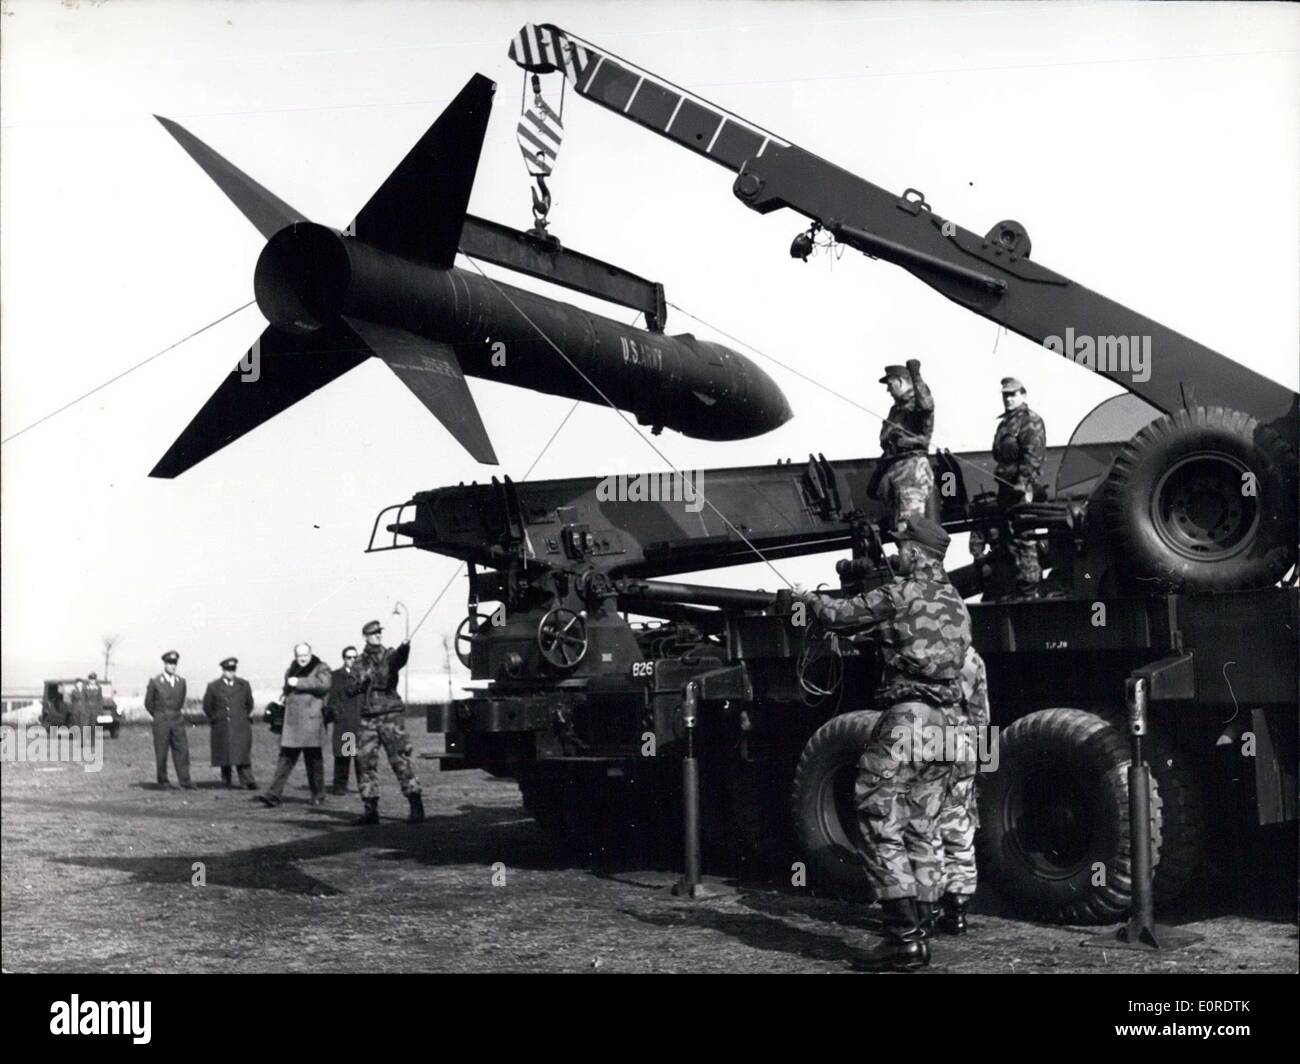 Mar. 20, 1959 - It did not thunder on the Thunder Mountain: When on March 19th soldiers of the artillery school on the Donnersberg (Donnersberg-Thunder Mountain) near Eschweiler/Germany showed an ''Honest John rocket'' to the press. The learner group ''D'' of the German Artillery School which has been educated at the 761 milli-metre rocket which is about 8 metres long and weighs 2500 kilogram, on Thursday showed the putting together and putting up one of these missiles Stock Photo